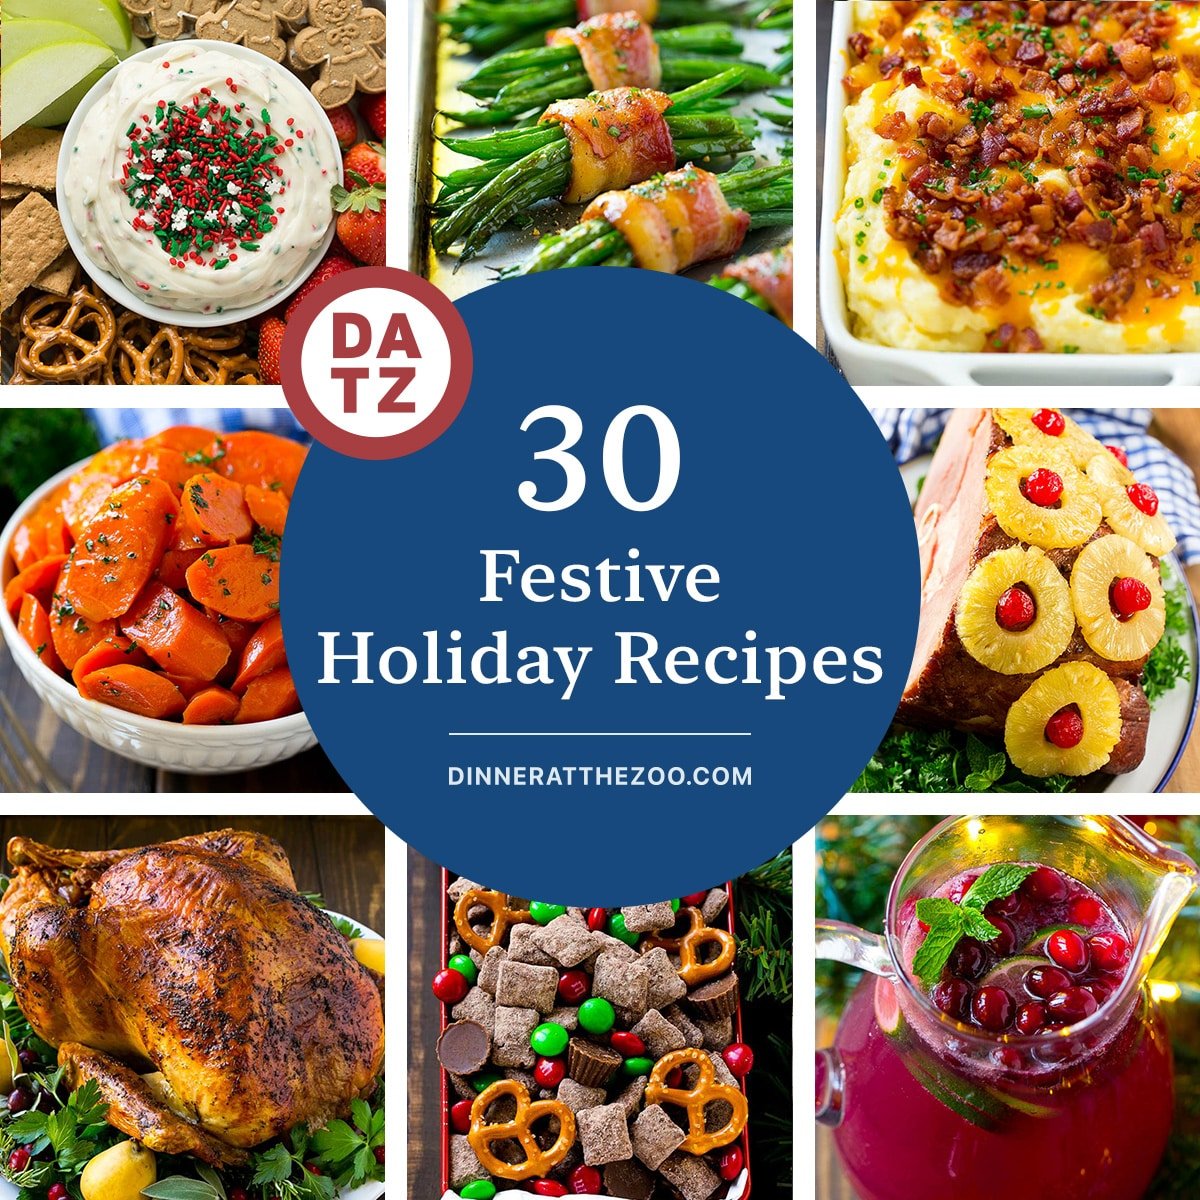 A group of images of festive holiday recipes like herb roasted turkey, Christmas cookie dough dip and loaded mashed potato casserole.